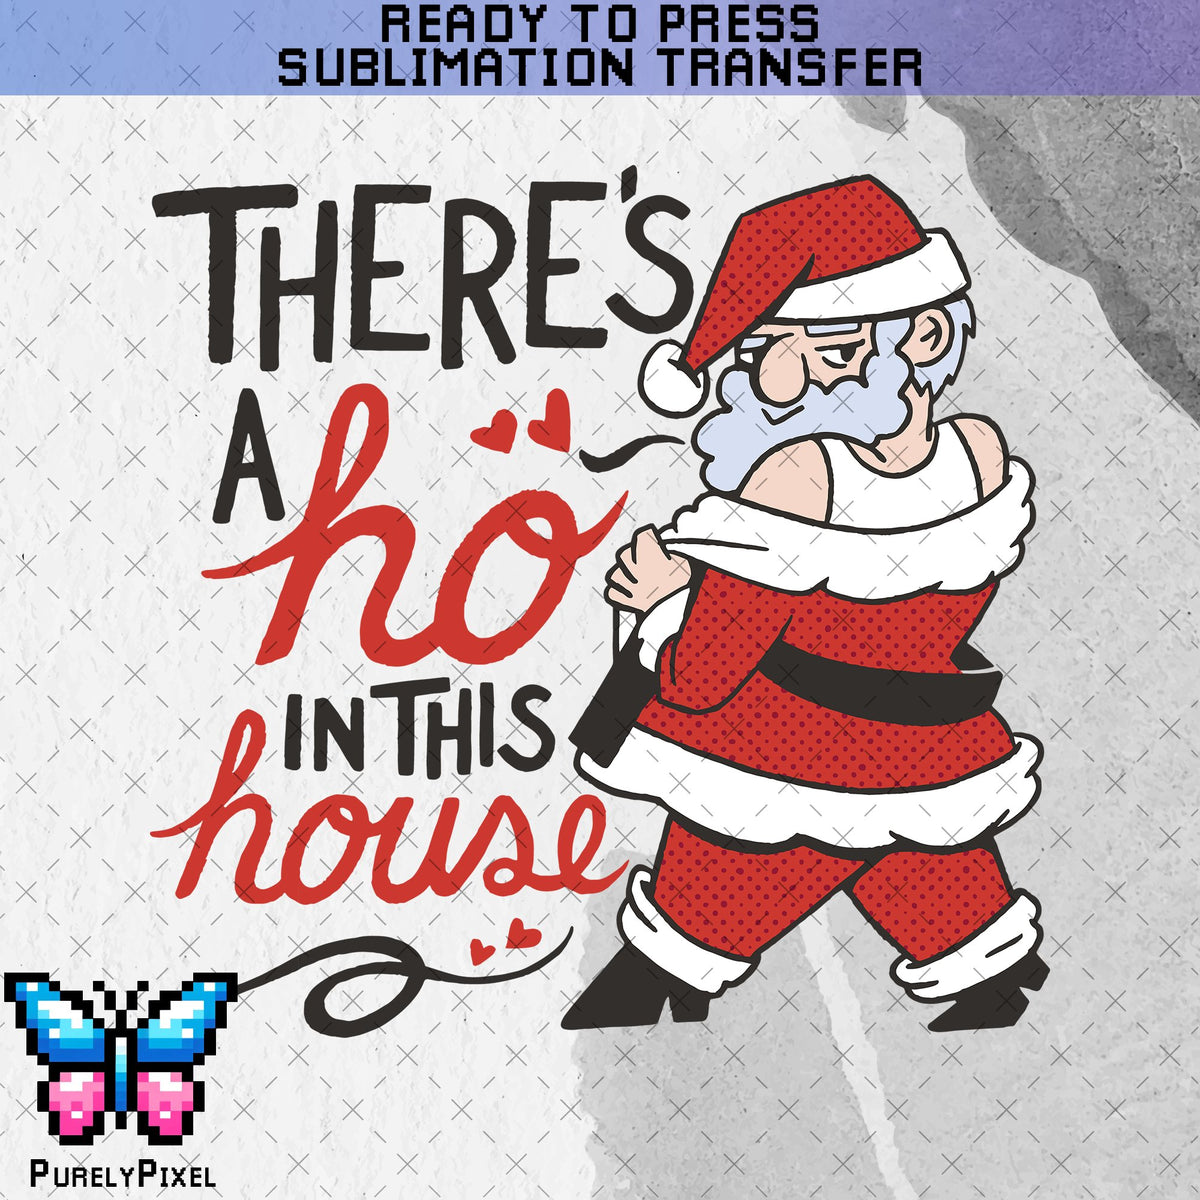 There's a Ho in this House Sub Transfer | Funny Christmas Sub Transfer | Christmas WAP | Ready to Press Sublimation Transfer | PurelyPixels | Sublimation Transfers